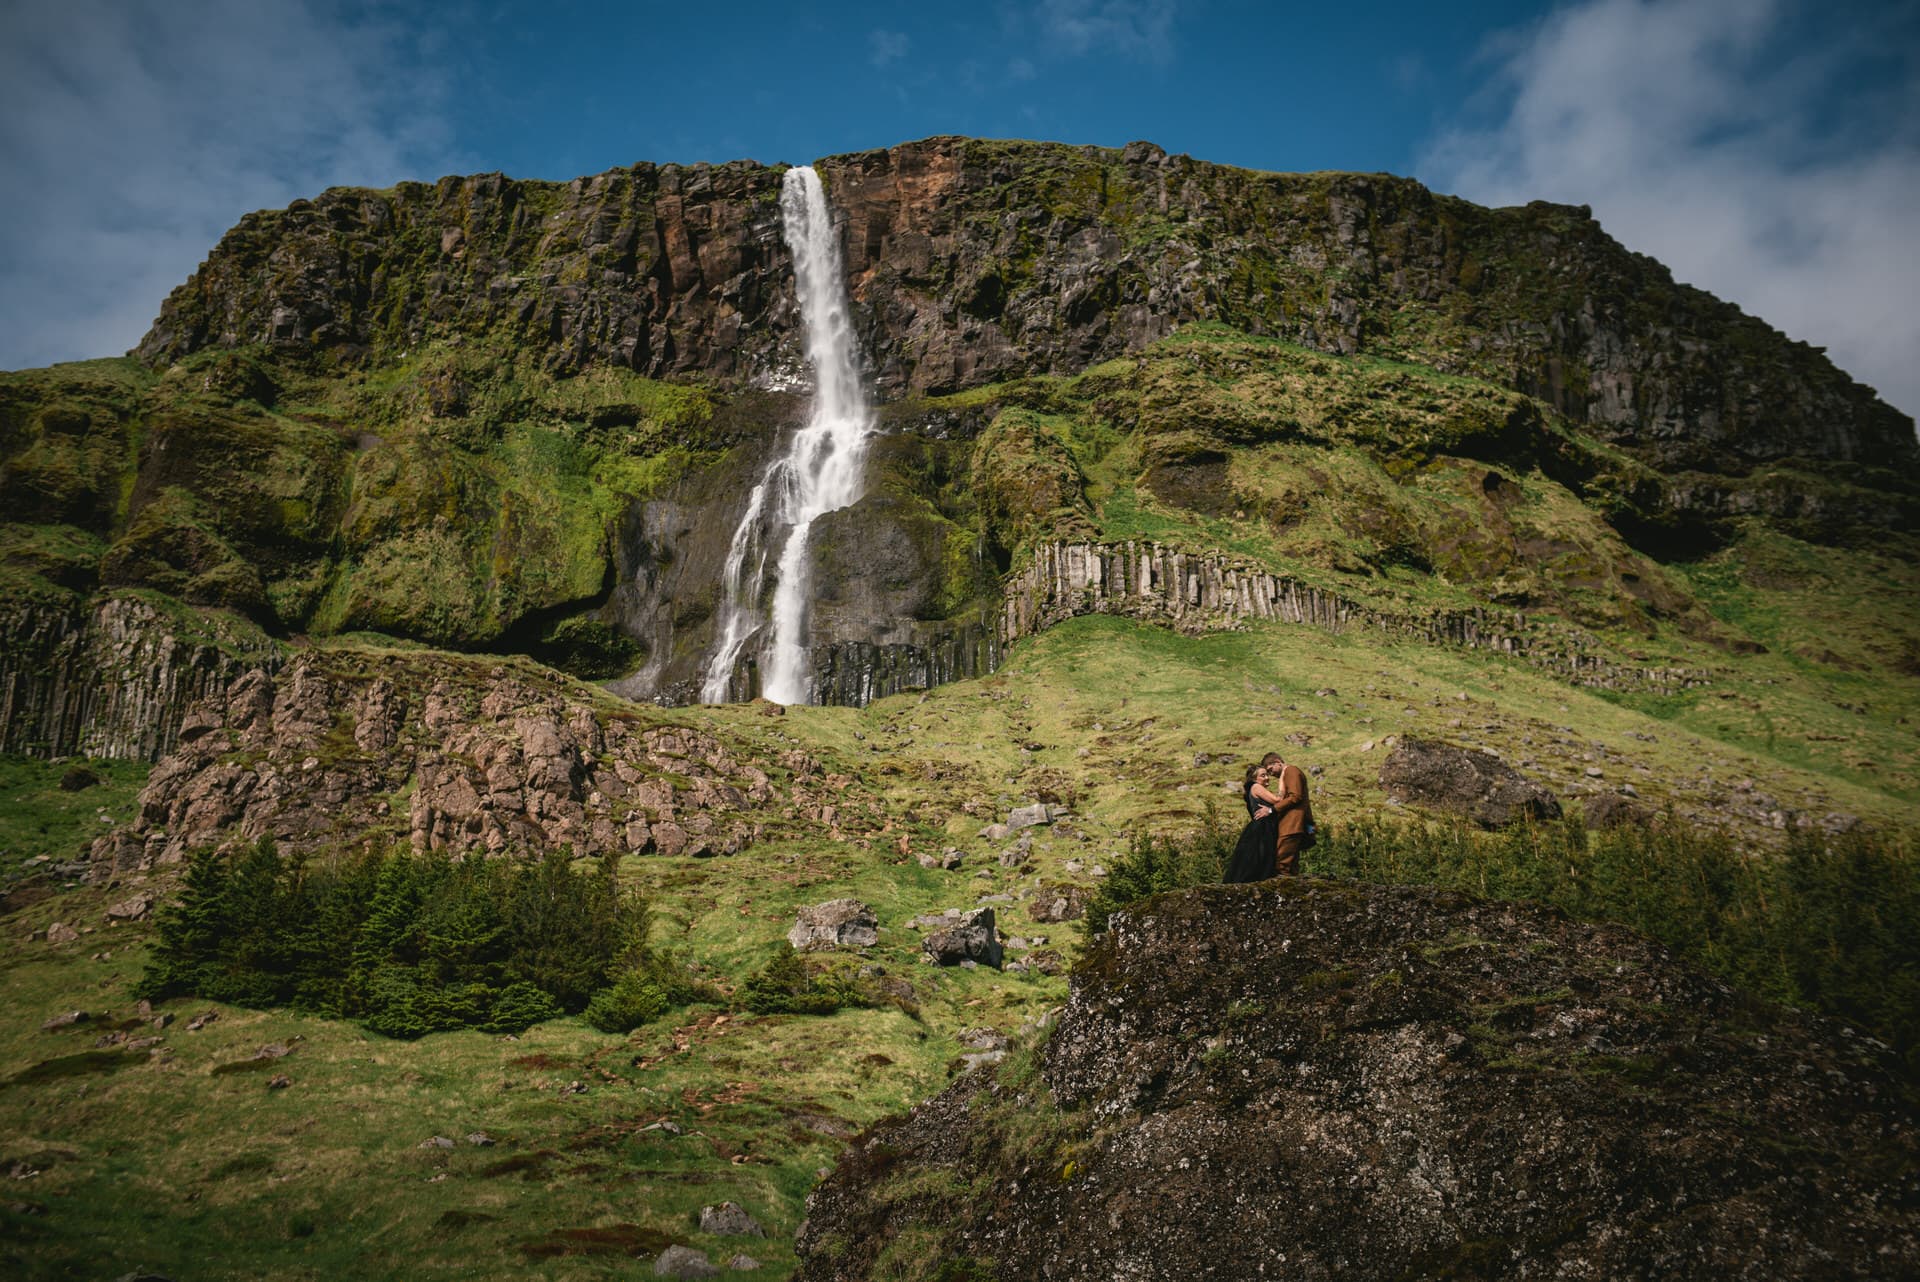 Loving gaze shared against the backdrop of Iceland's rugged and untouched beauty.